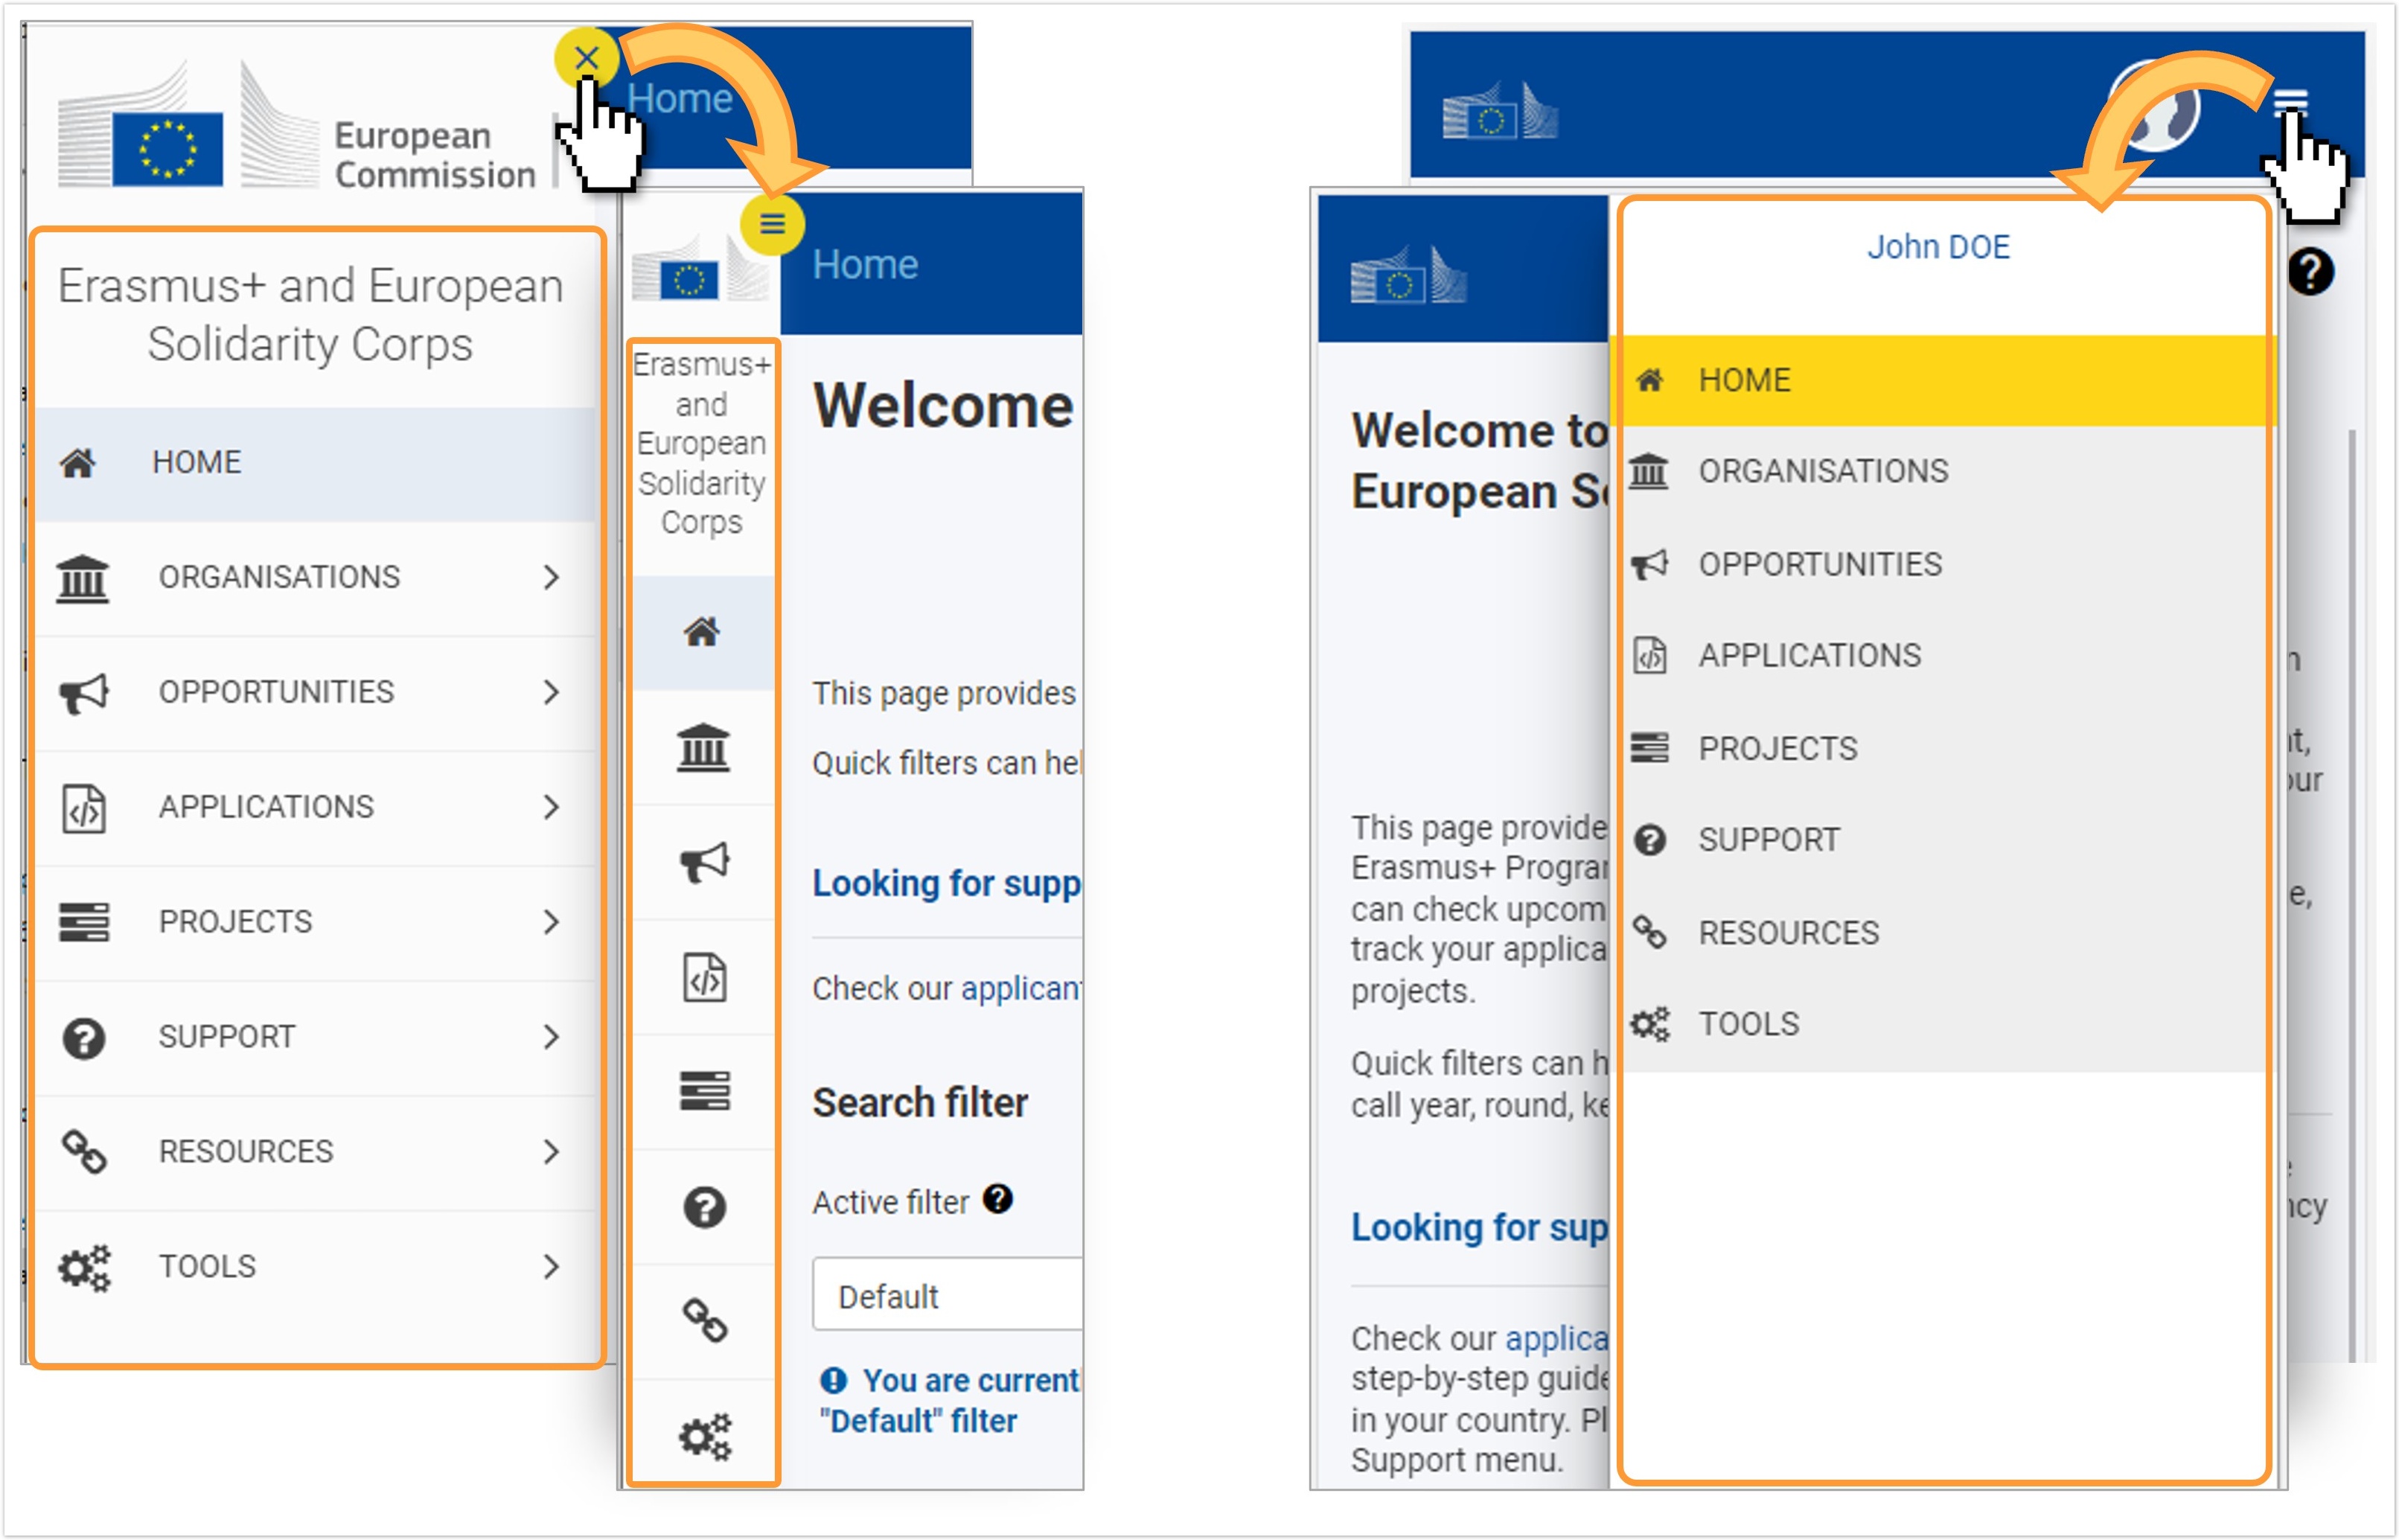 Menu display on desktop computer (left) and mobile device (right) for applicants and beneficiaries